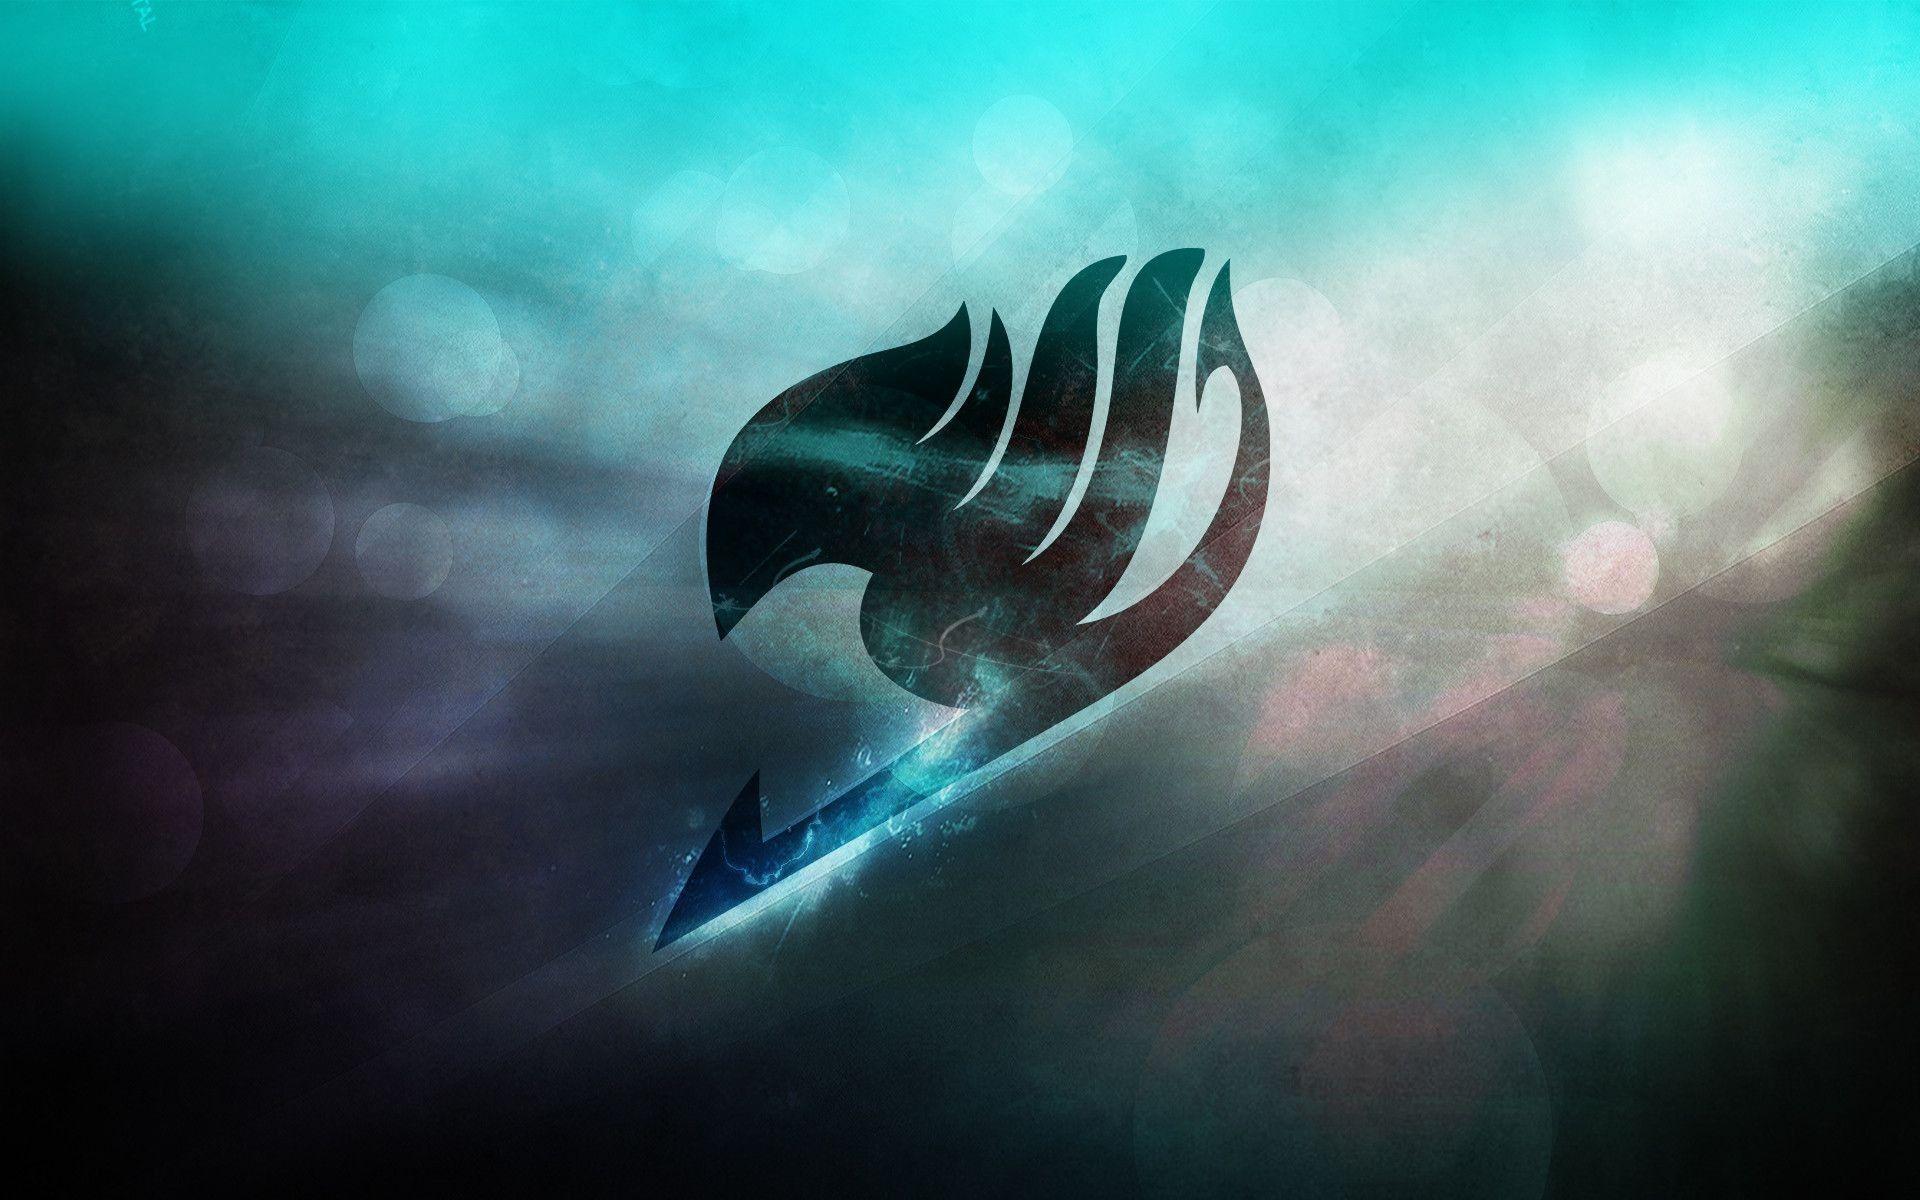 Fairy Tail Logo wallpaperDownload free cool full HD background